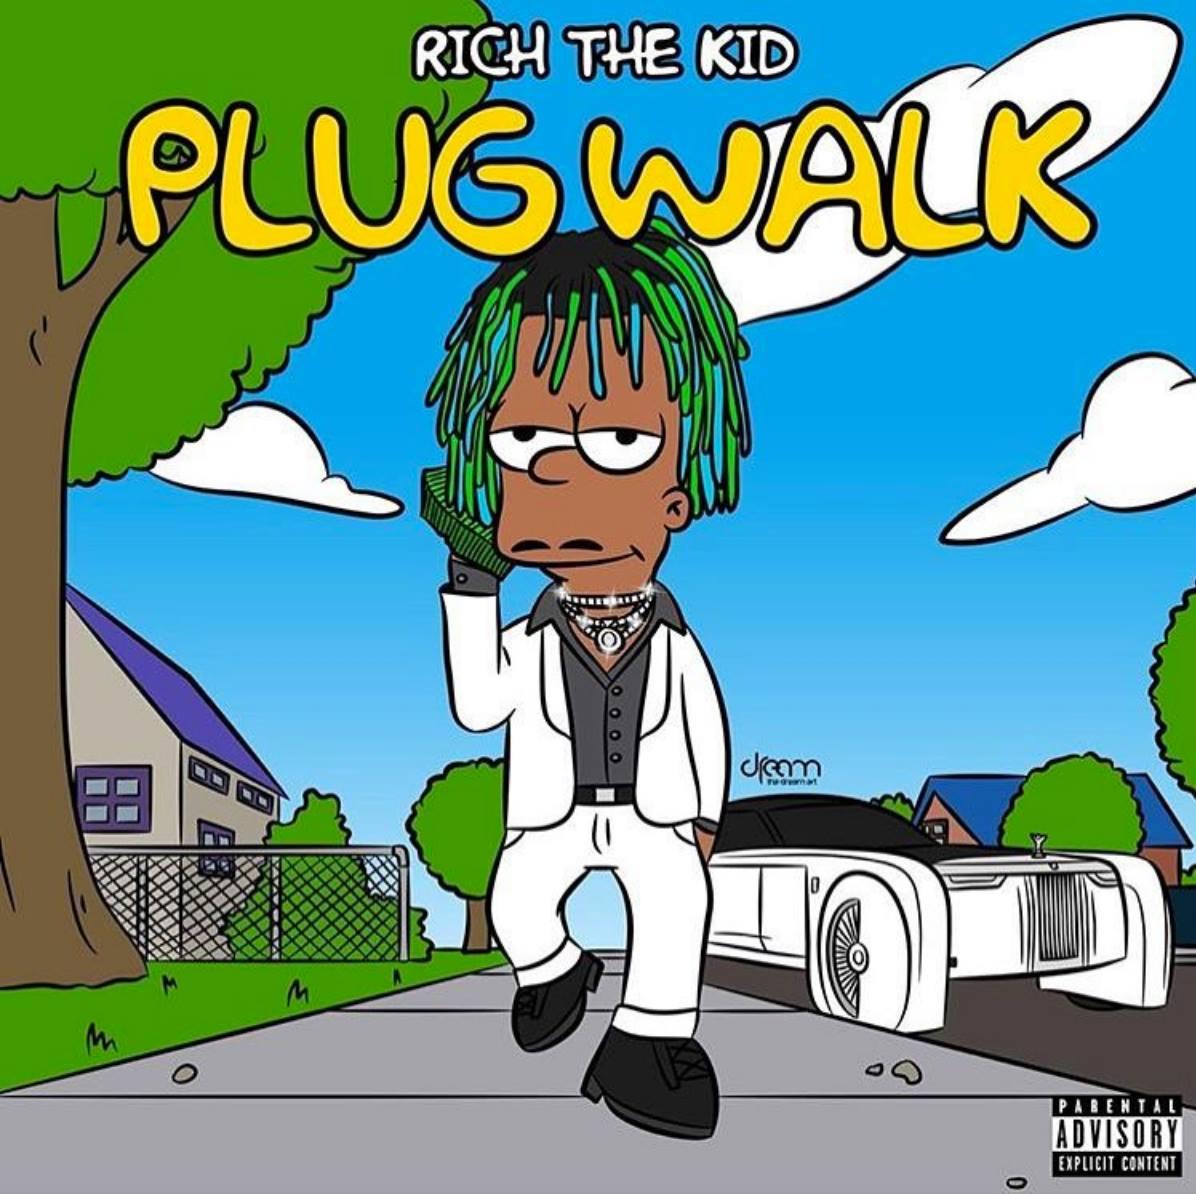 New Music: Rich The Kid